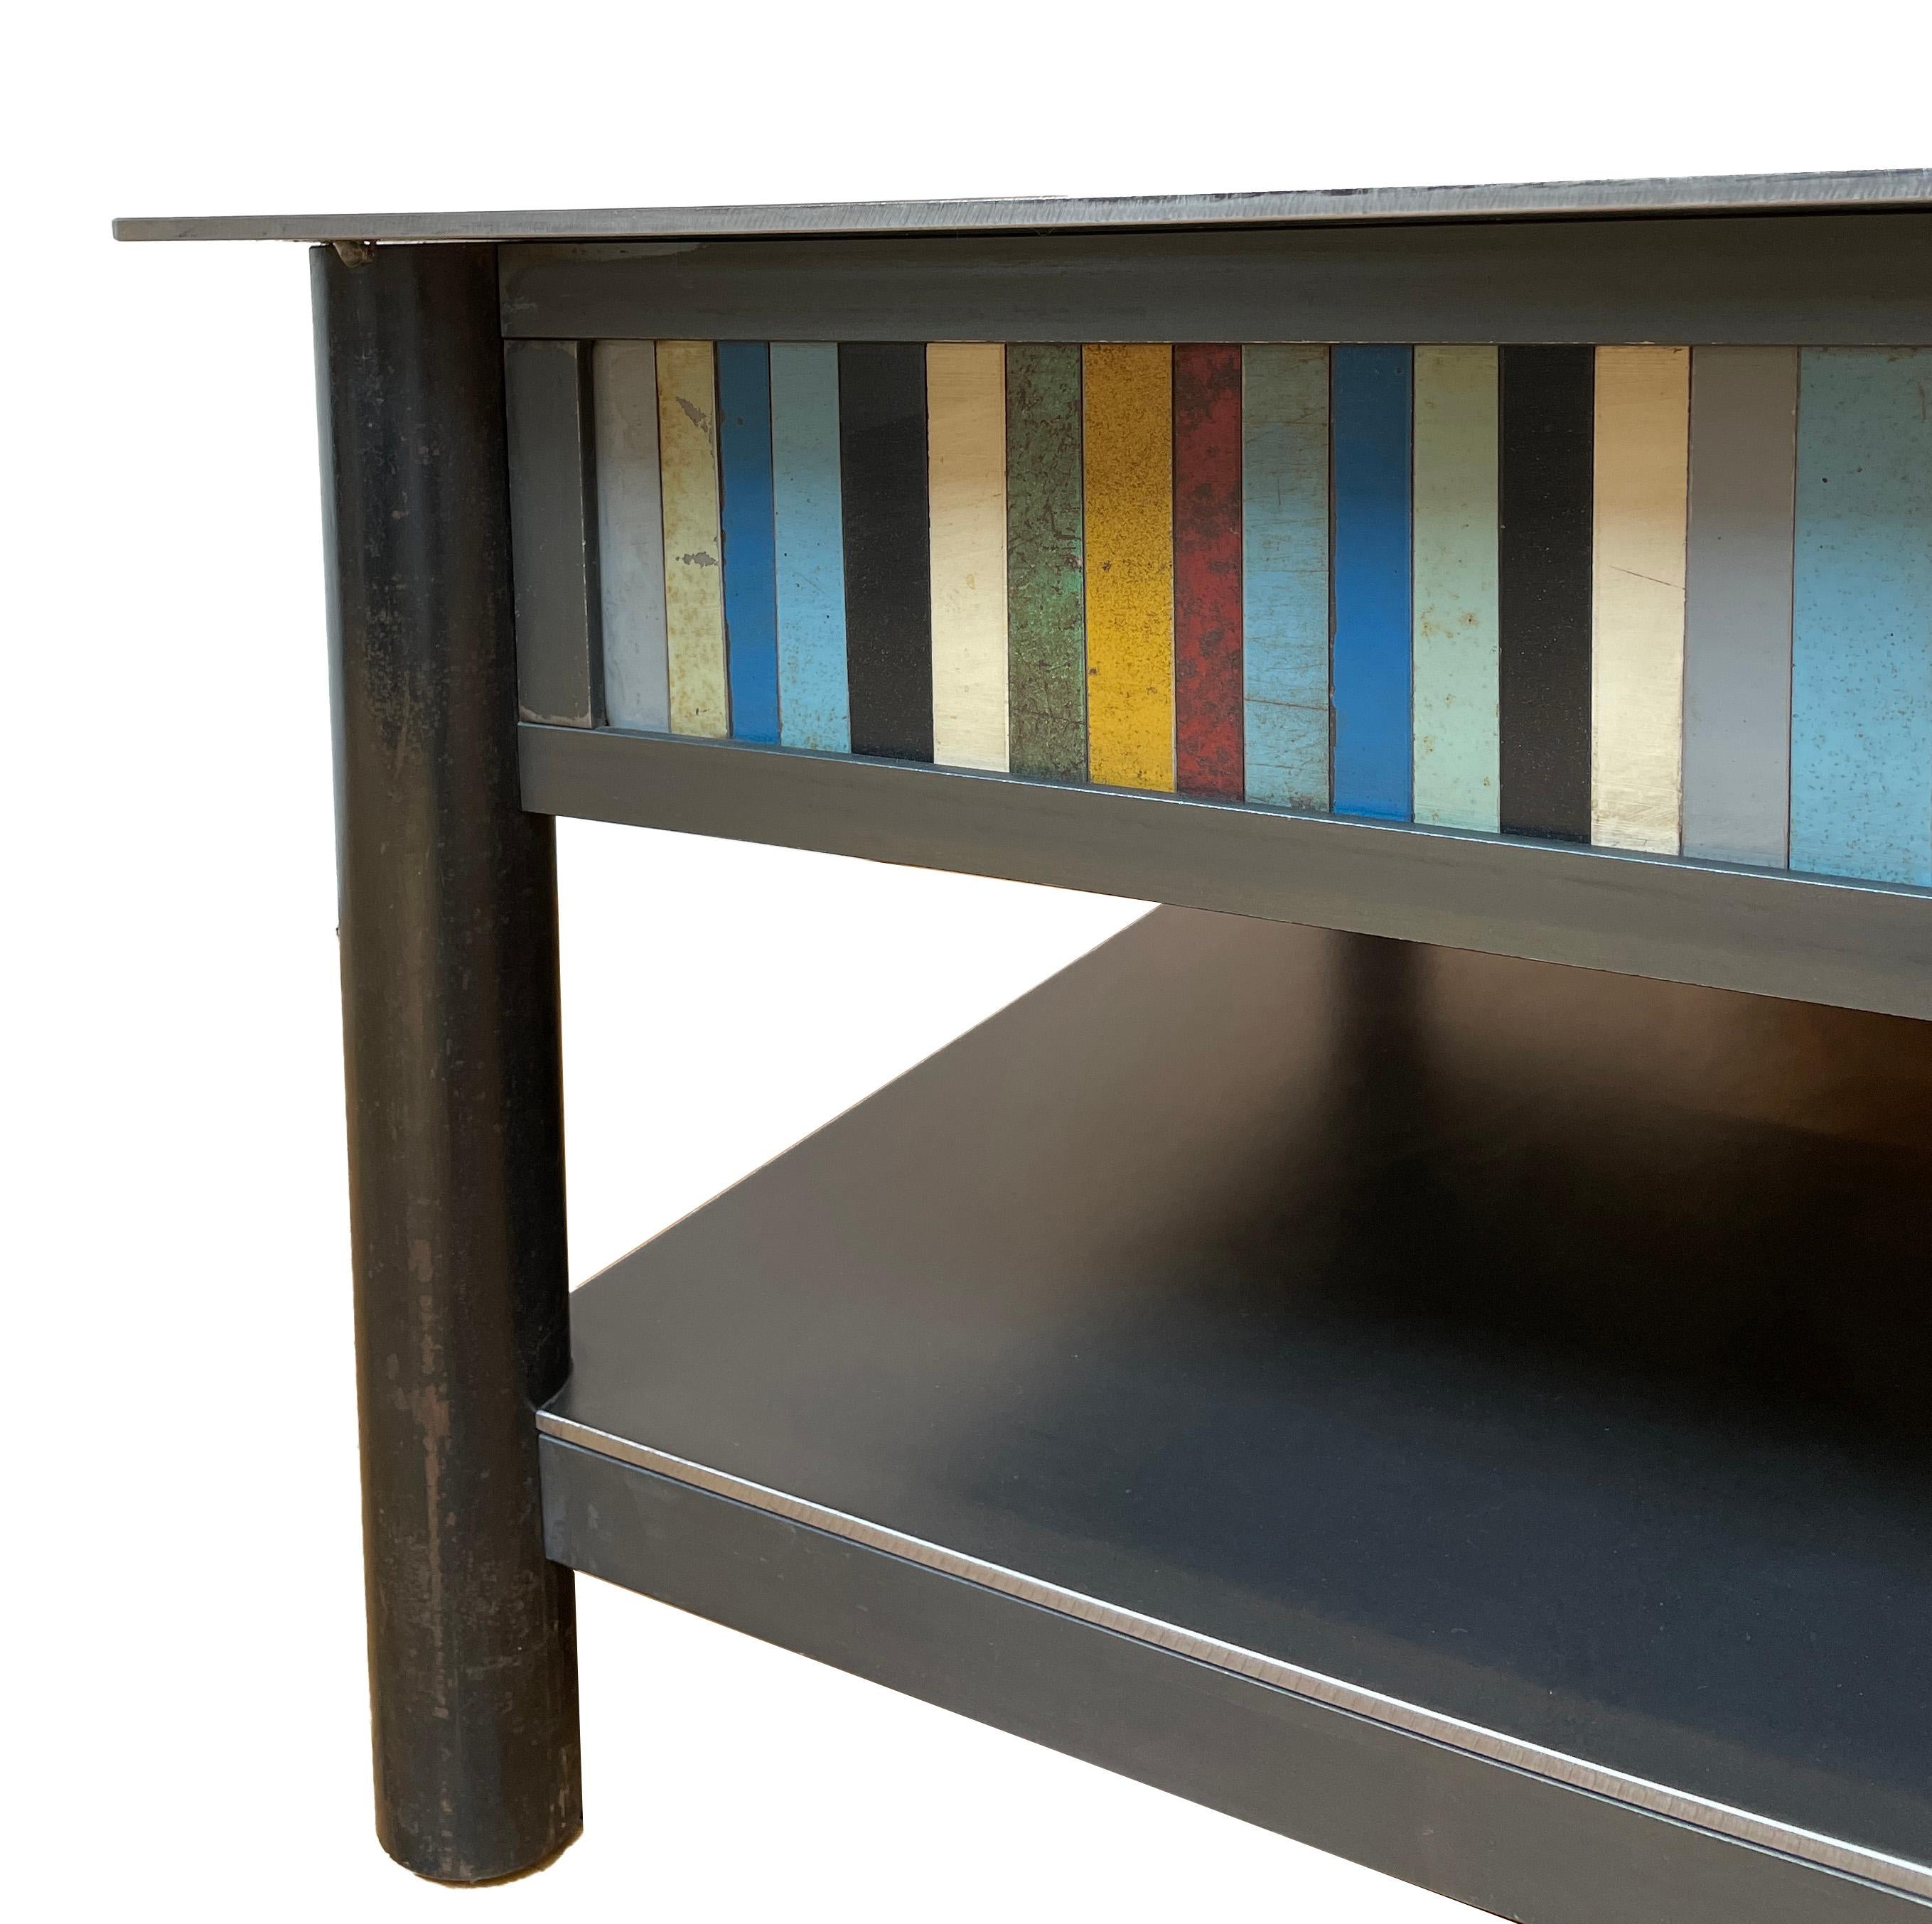 American Jim Rose Steel Furniture, Square Coffee Table with Shelf and Multi-Color Panels